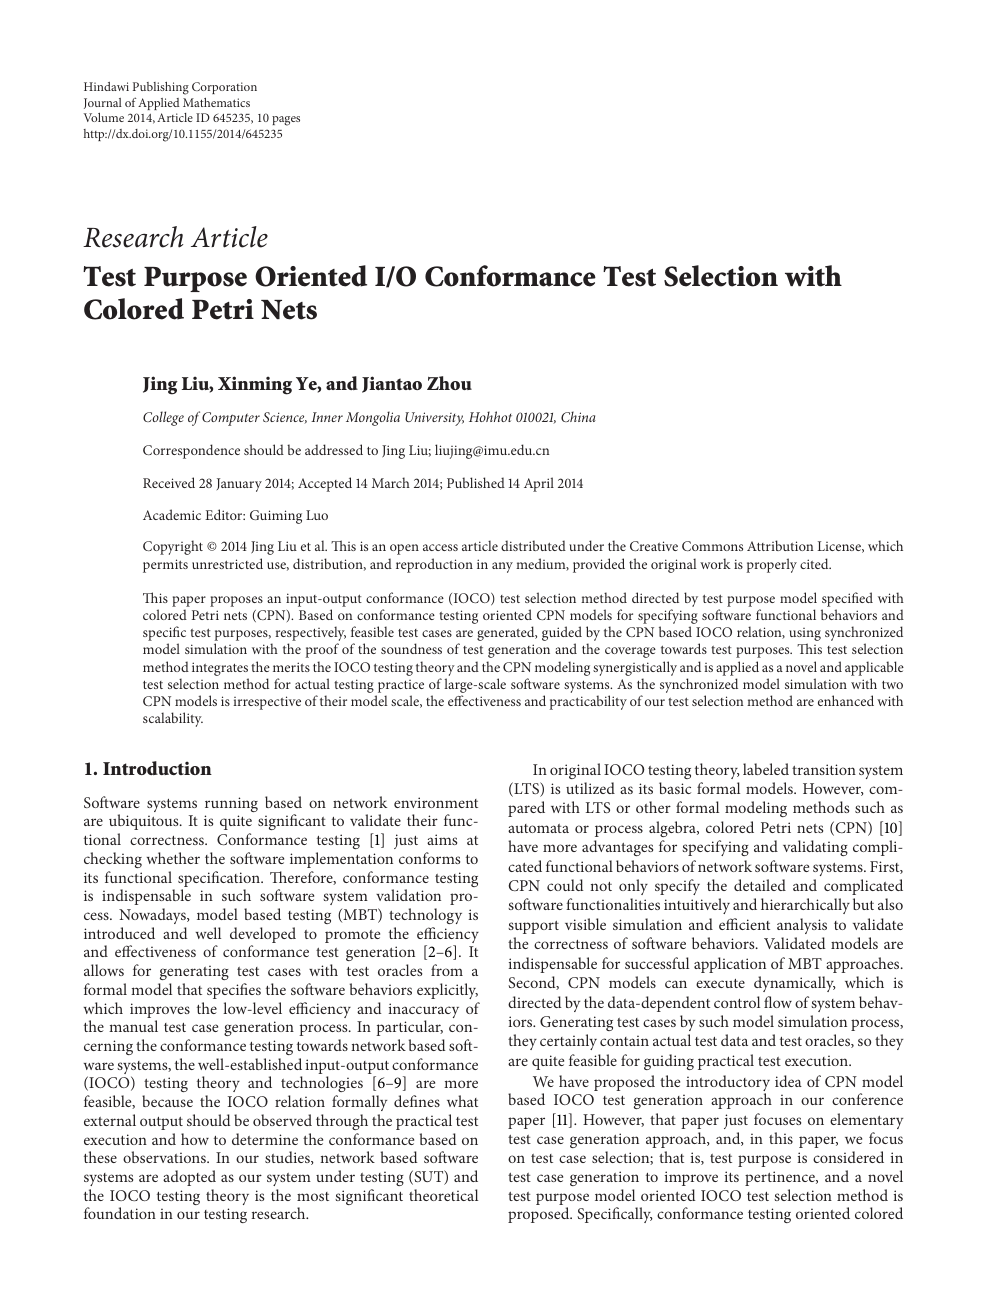 Test Purpose Oriented I O Conformance Test Selection With Colored Petri Nets Topic Of Research Paper In Computer And Information Sciences Download Scholarly Article Pdf And Read For Free On Cyberleninka Open